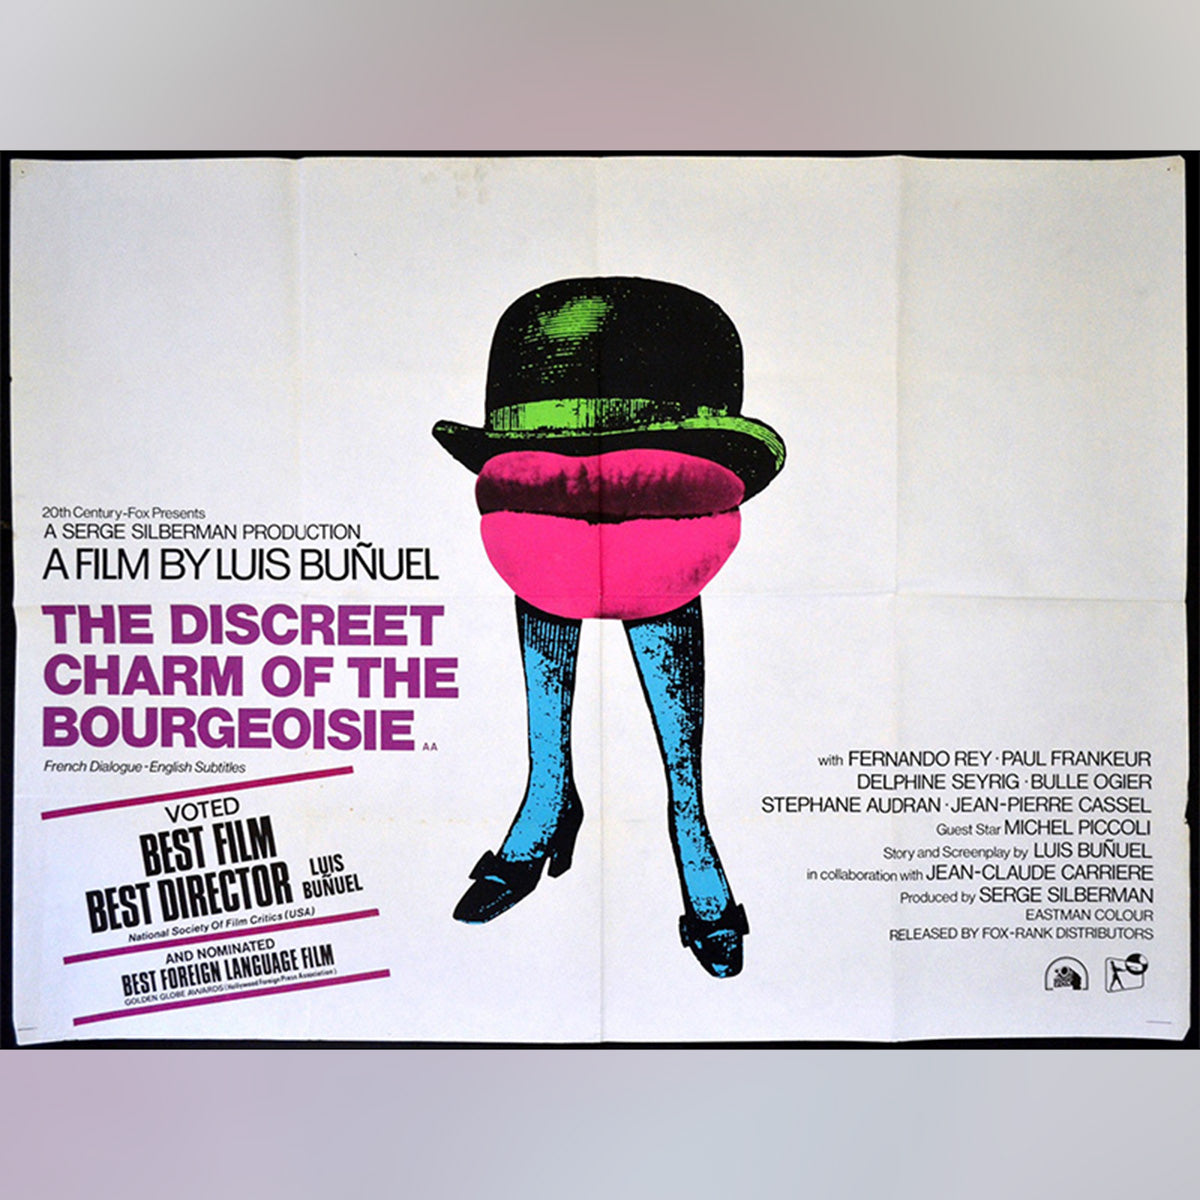 Original Movie Poster of Discreet Charm Of The Bourgeoisie, The (1972)